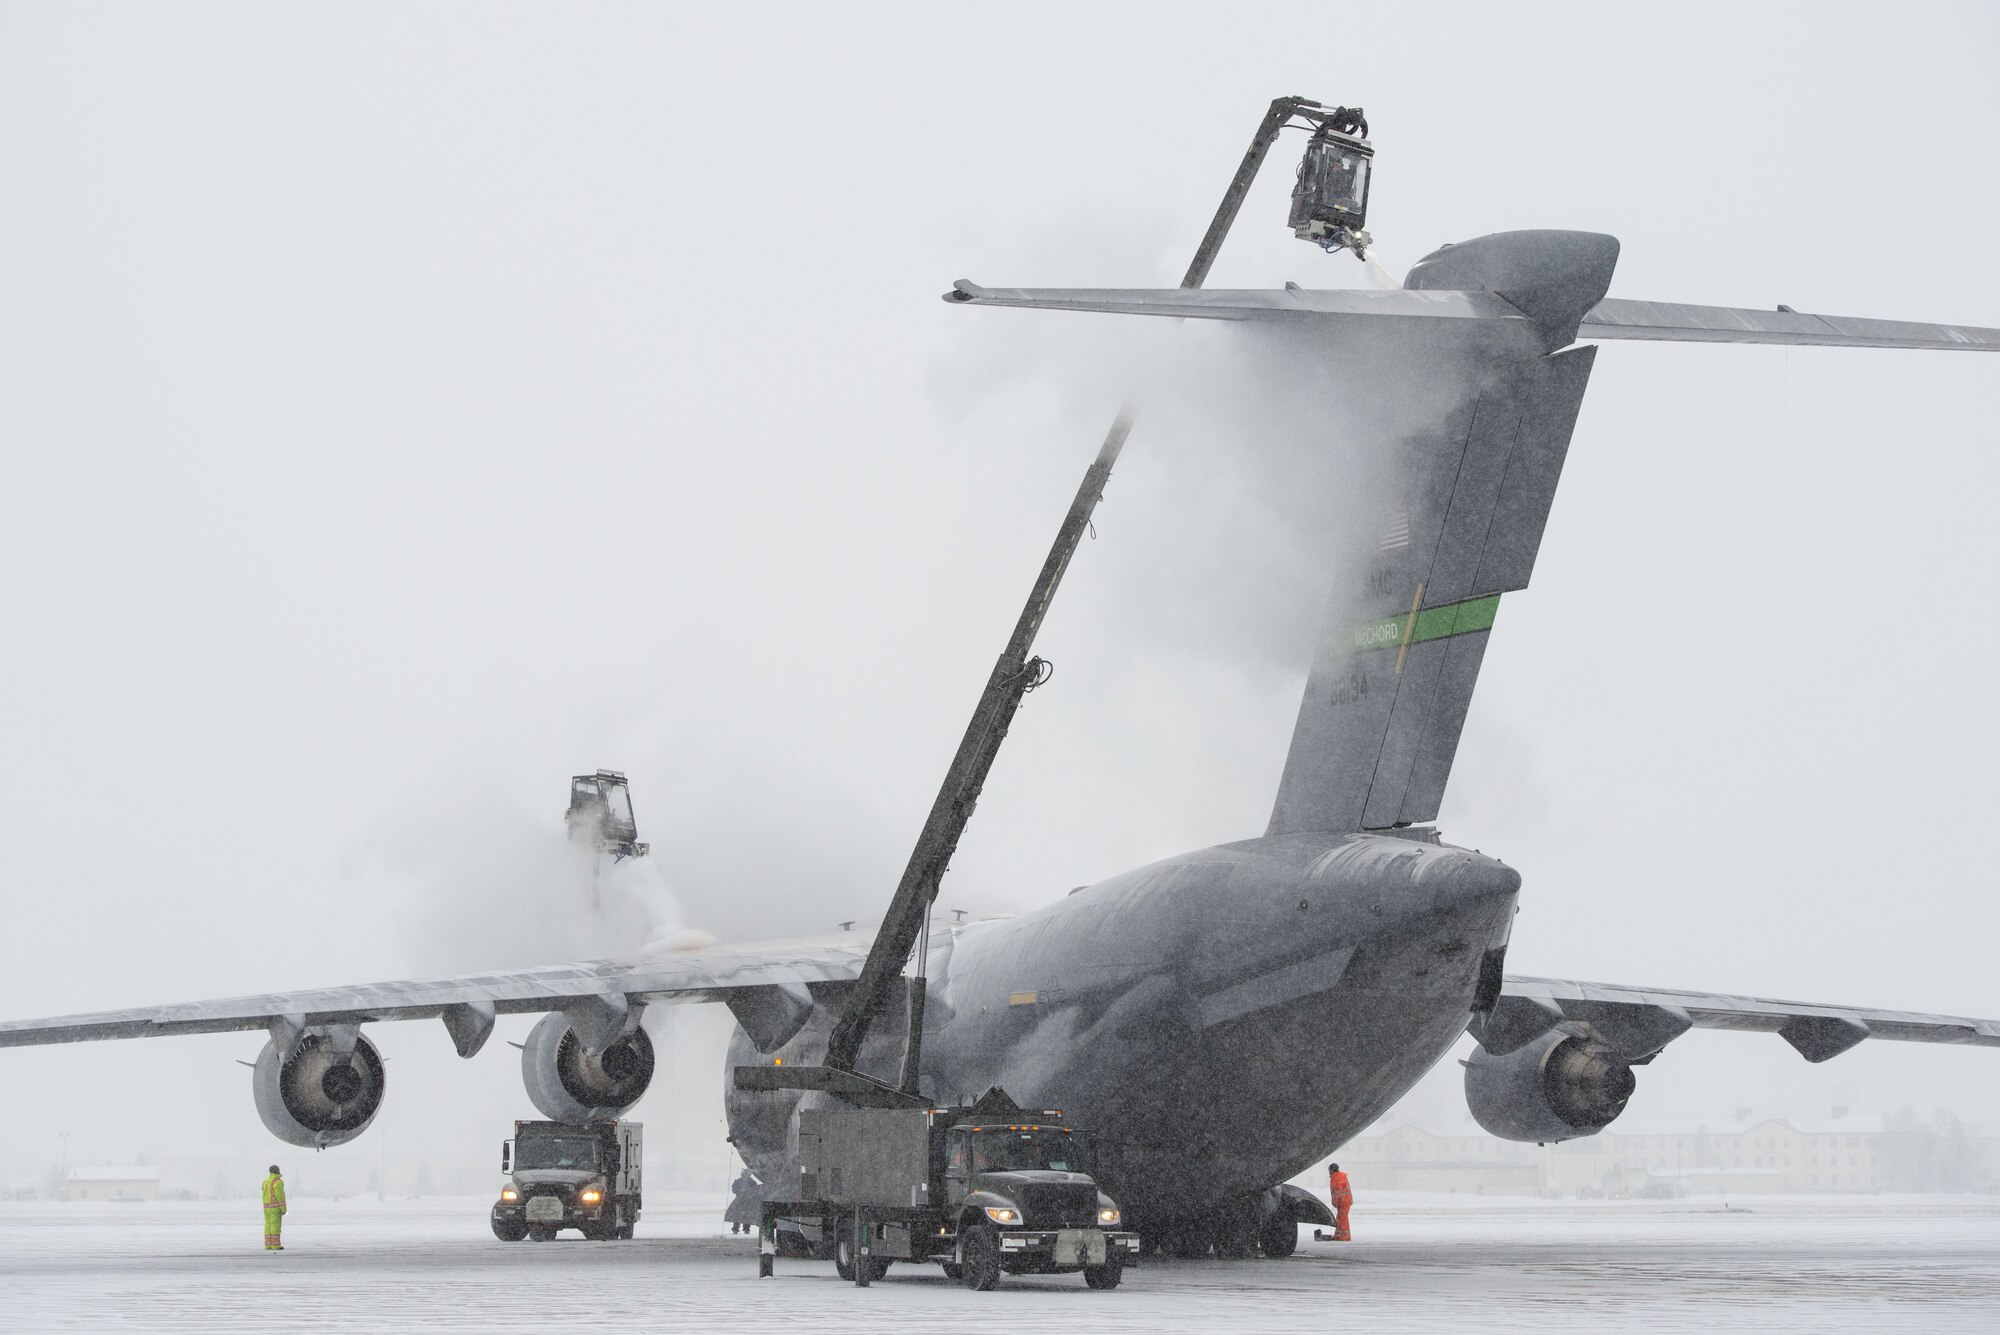 Airmen assigned to the 732nd Air Mobility Squadron de-ice a C-17 Globemaster III out of Joint Base Lewis-McChord, Wa., while conducting flight operations at Joint Base Elmendorf-Richardson, Alaska, Jan. 25, 2018. During the harsh Alaskan winters de-icing keeps aircraft operational by removing layers of snow, ice and frost that could adversely affect flights. (U.S. Air Force photo by Alejandro Peña)